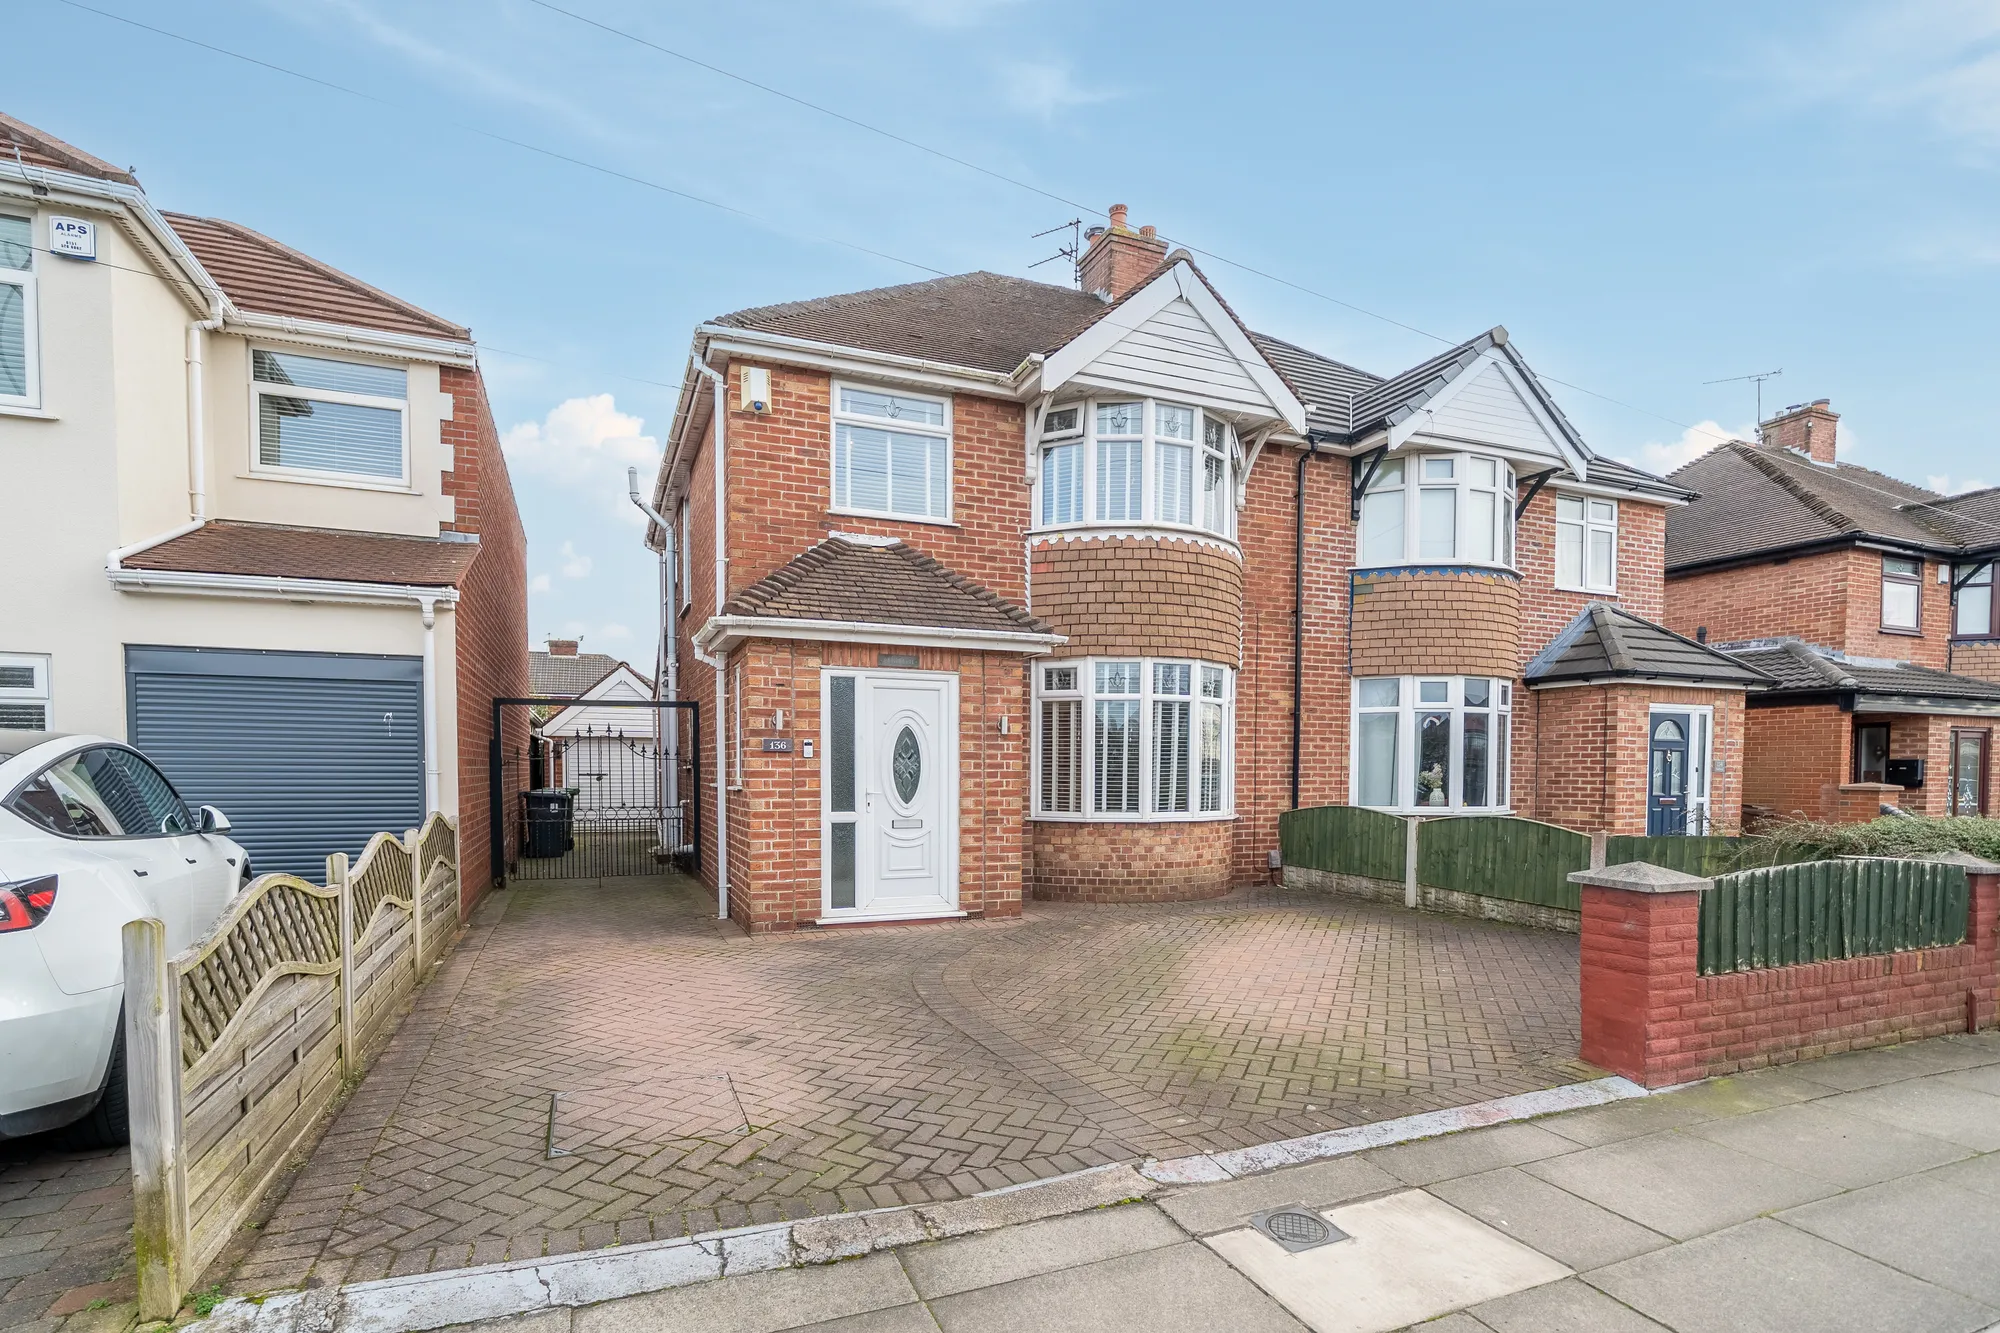 Welcome to your future home sweet home on Northway in Maghull! This extended three-bedroom bow bay semi-detached beauty is not just a house; it's a lifestyle upgrade waiting to happen!